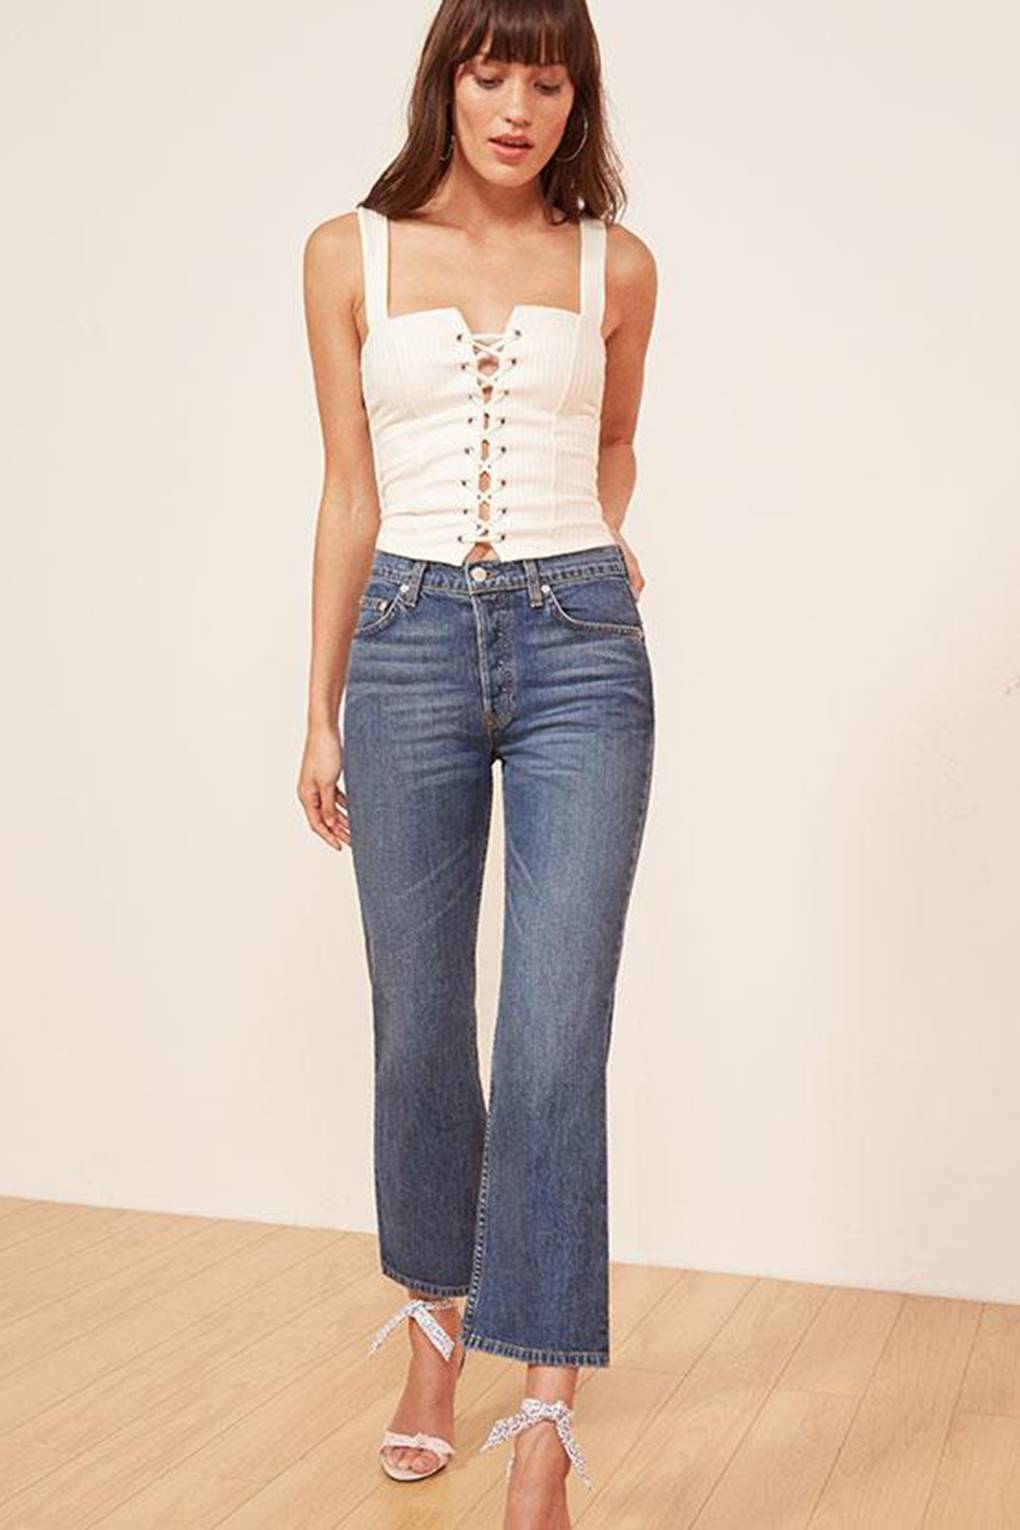 Reformation Jeans: The Pair With A 3,000 Person Waiting List Are Back ...